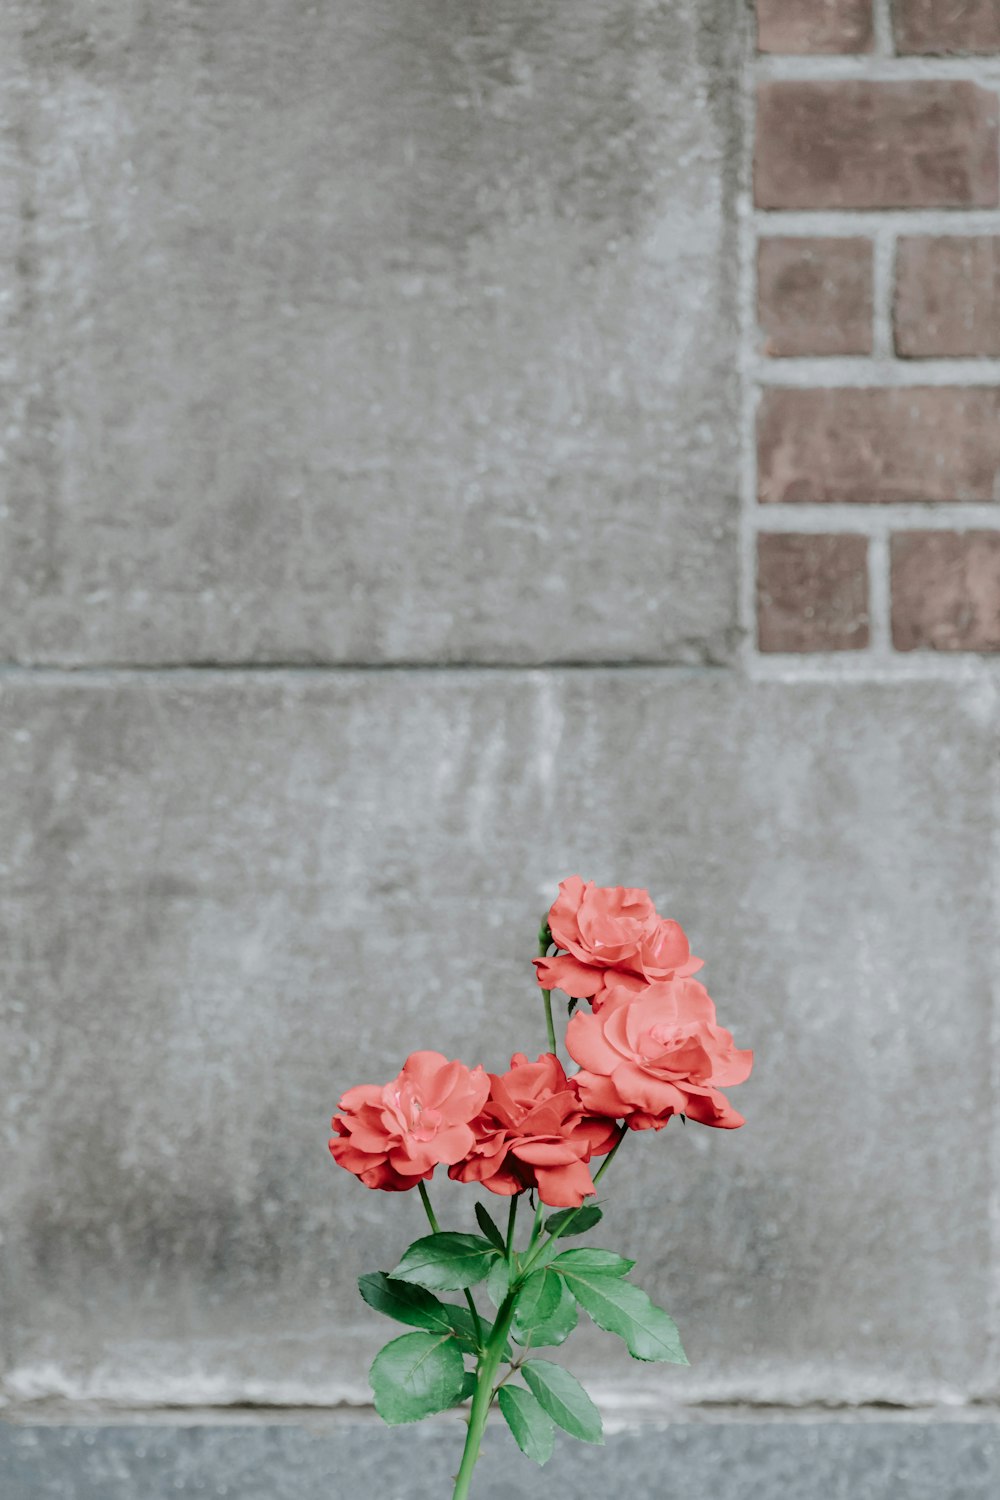 red rose flowers next to gray concrete surface during daytime